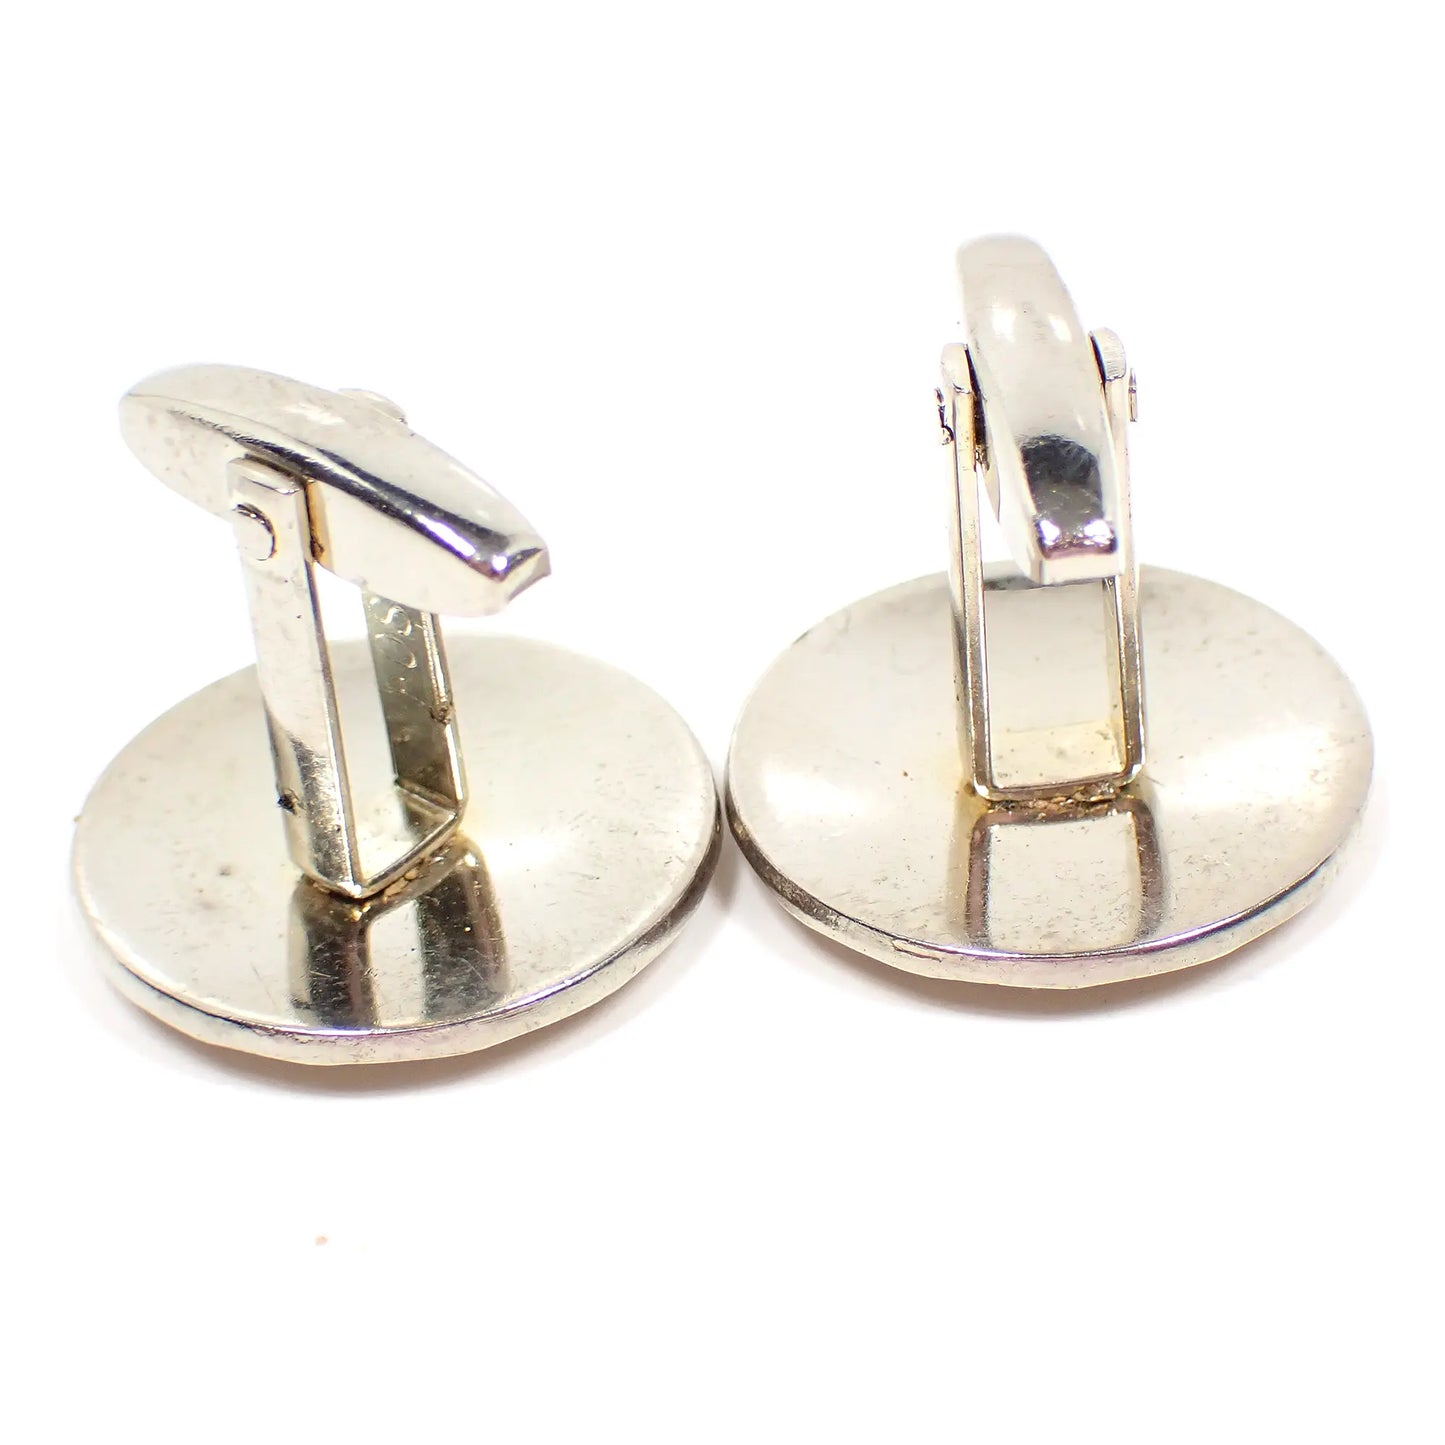 Foster Etched Round Mid Century Vintage Cufflinks, Matte Silver Tone Cuff Links with Faceted Edge